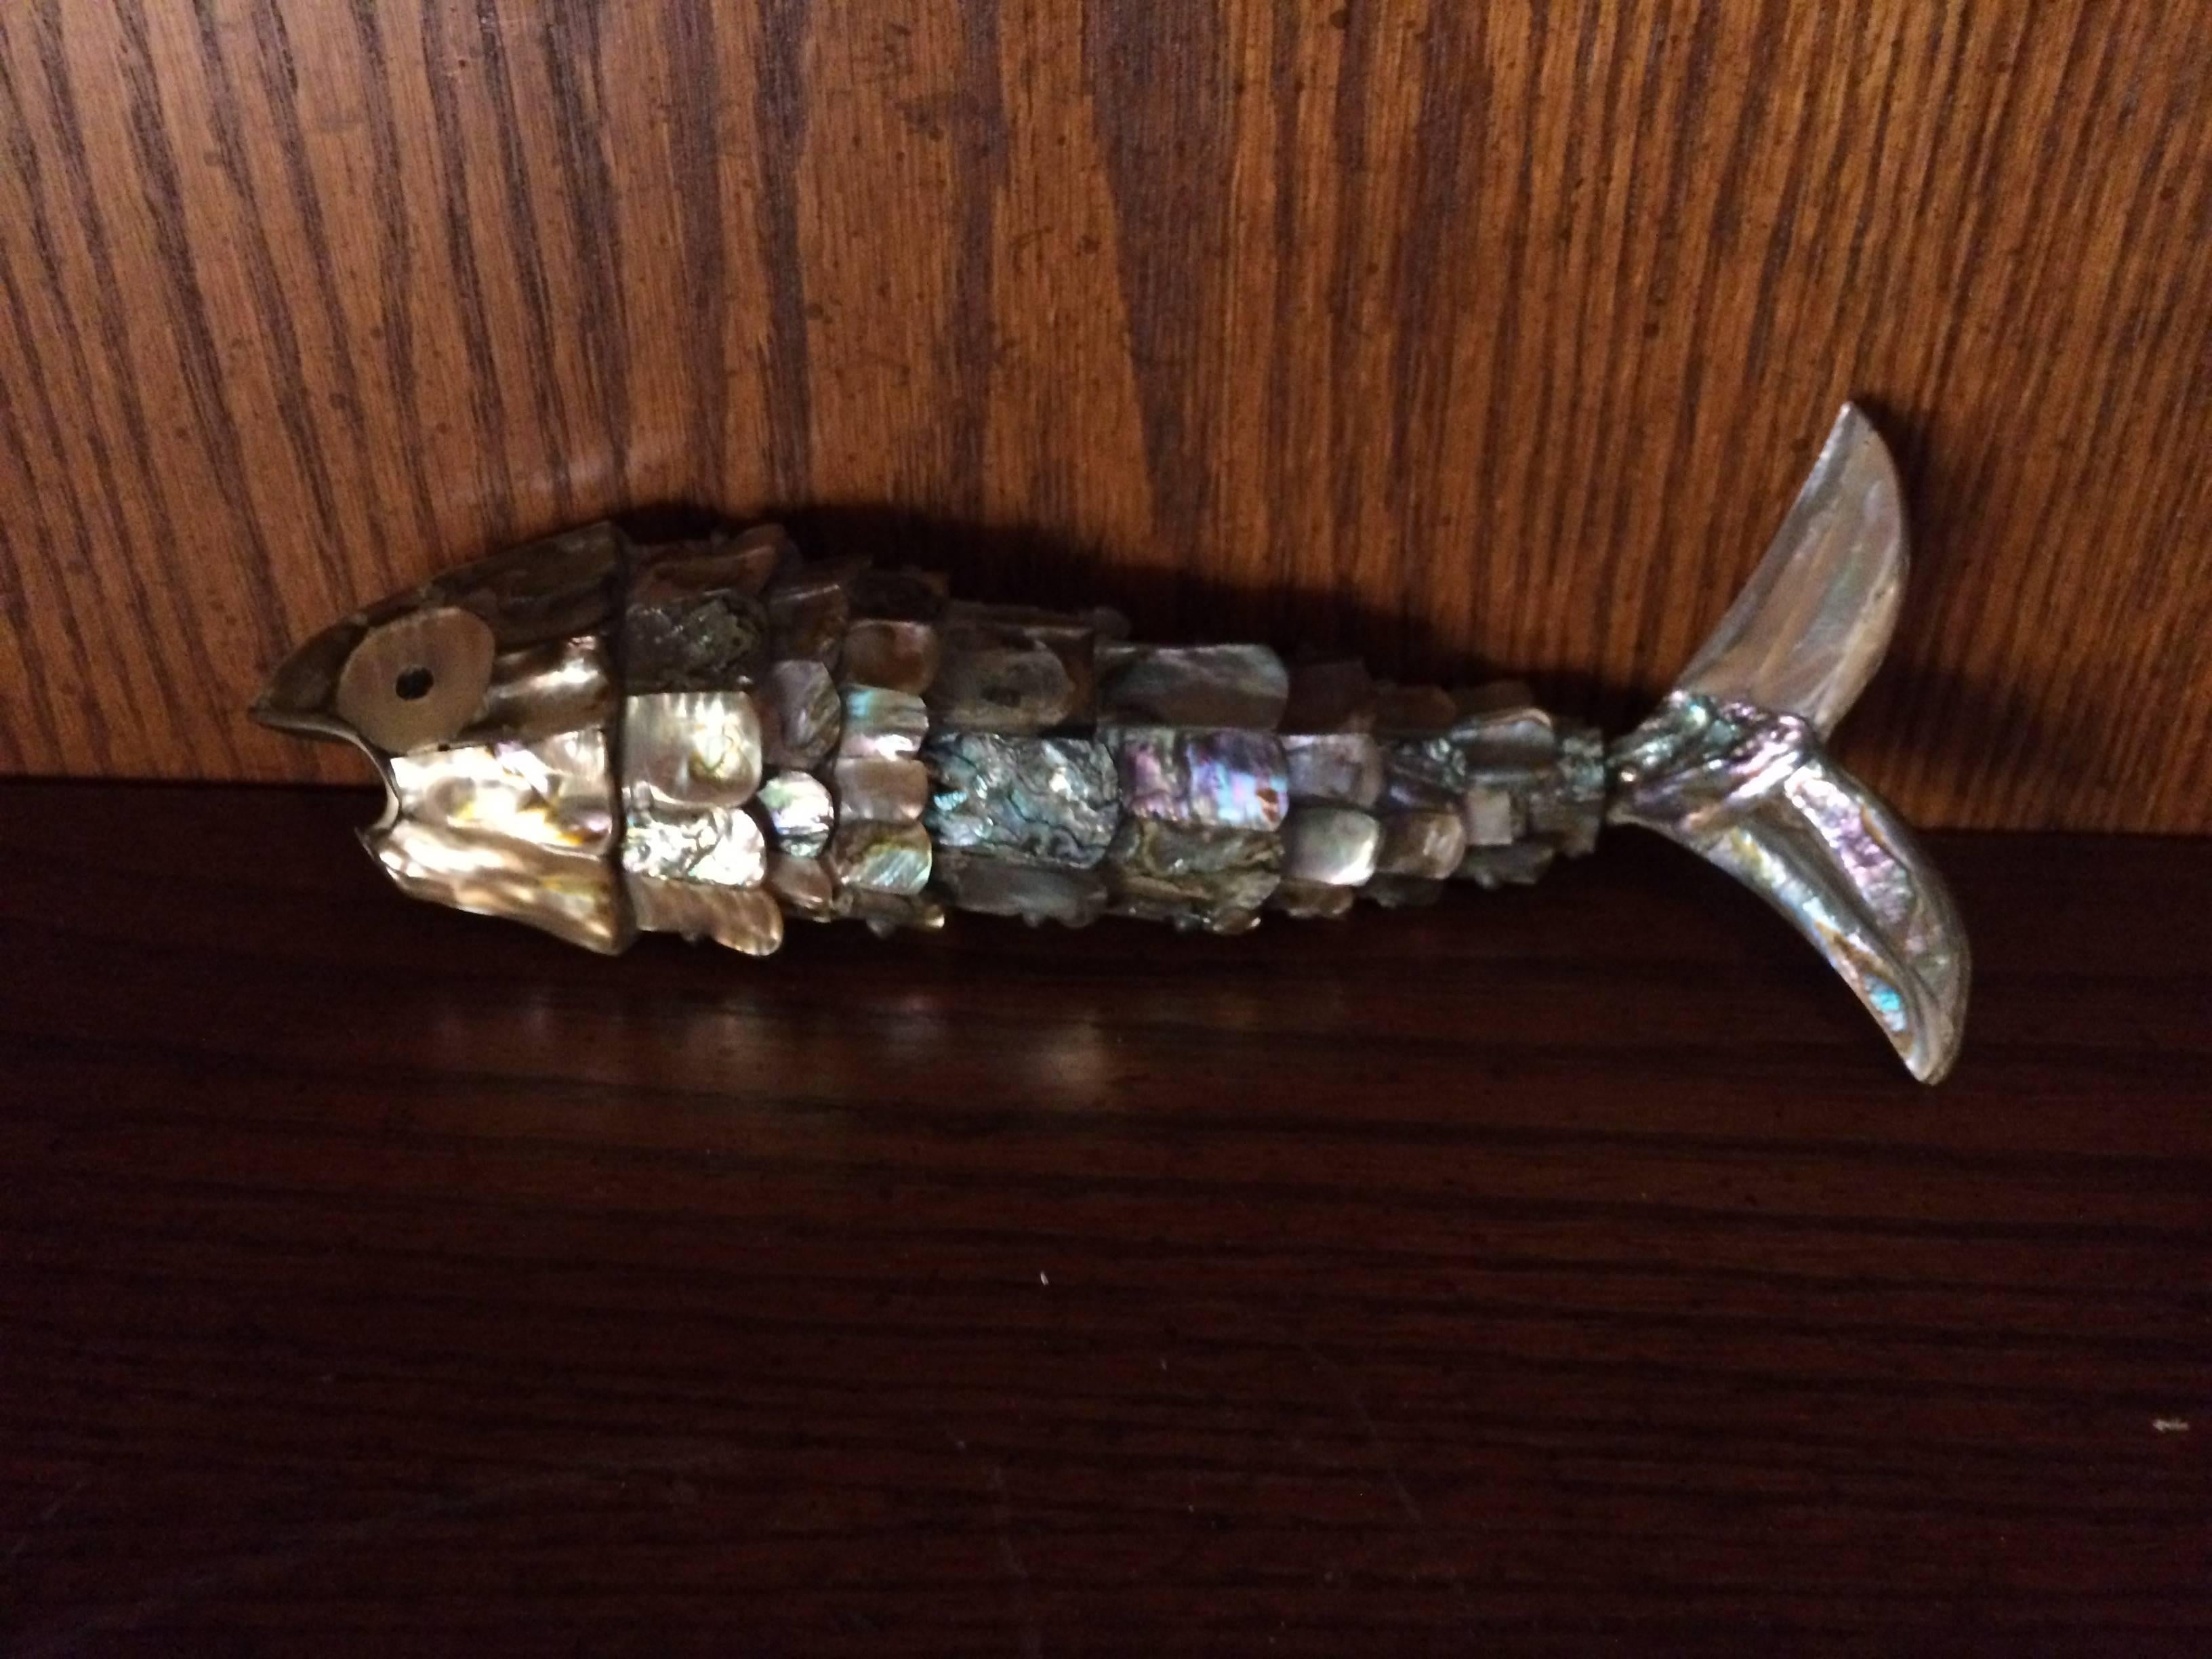 Beautiful and decorative, this abalone fish is poised and designed to open a bottle, great for the creative bartender and a great conversation piece.